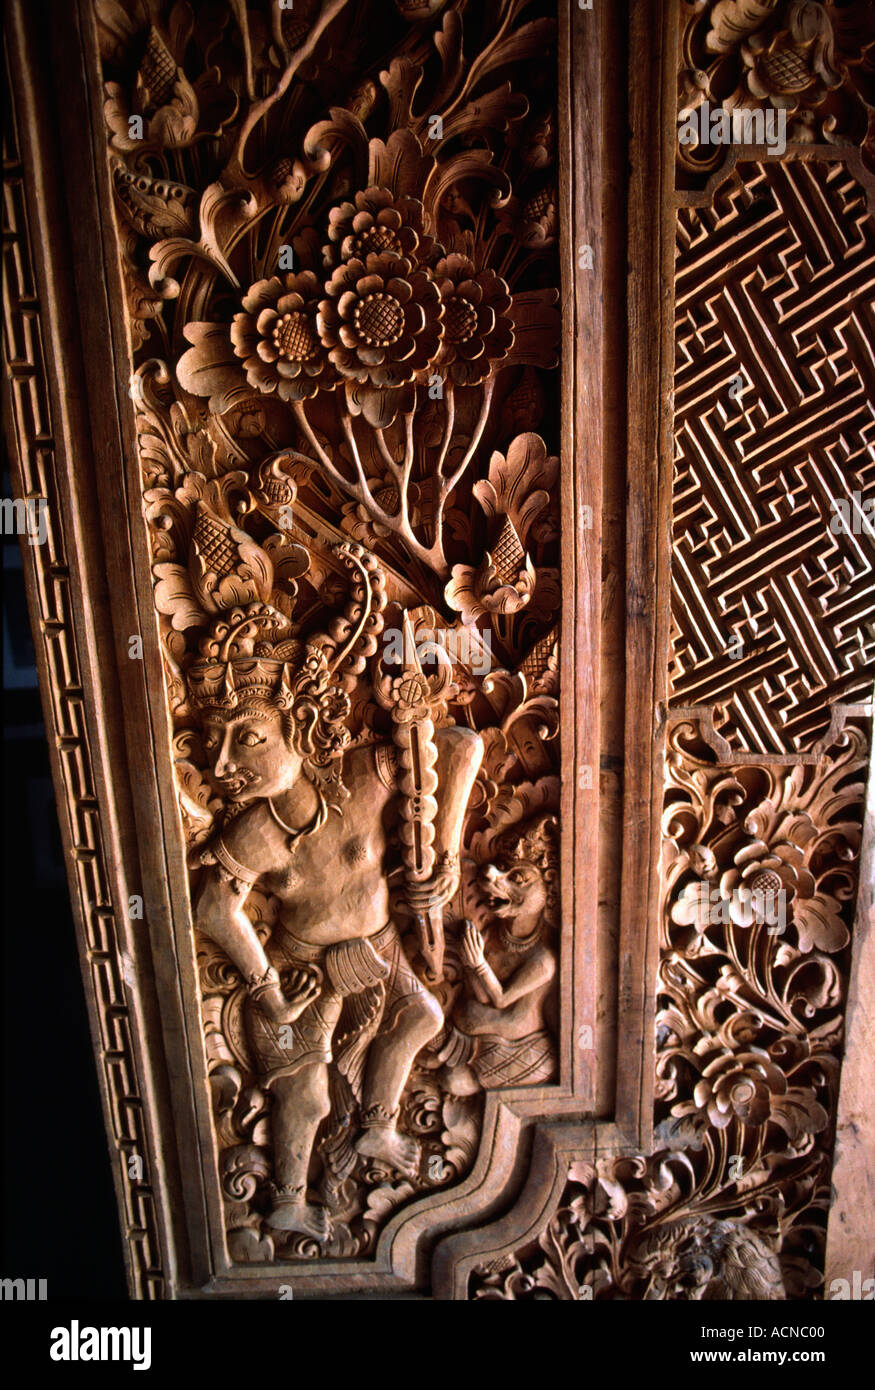 Indonesia Bali craft wood carving Ubud detail of carved ...